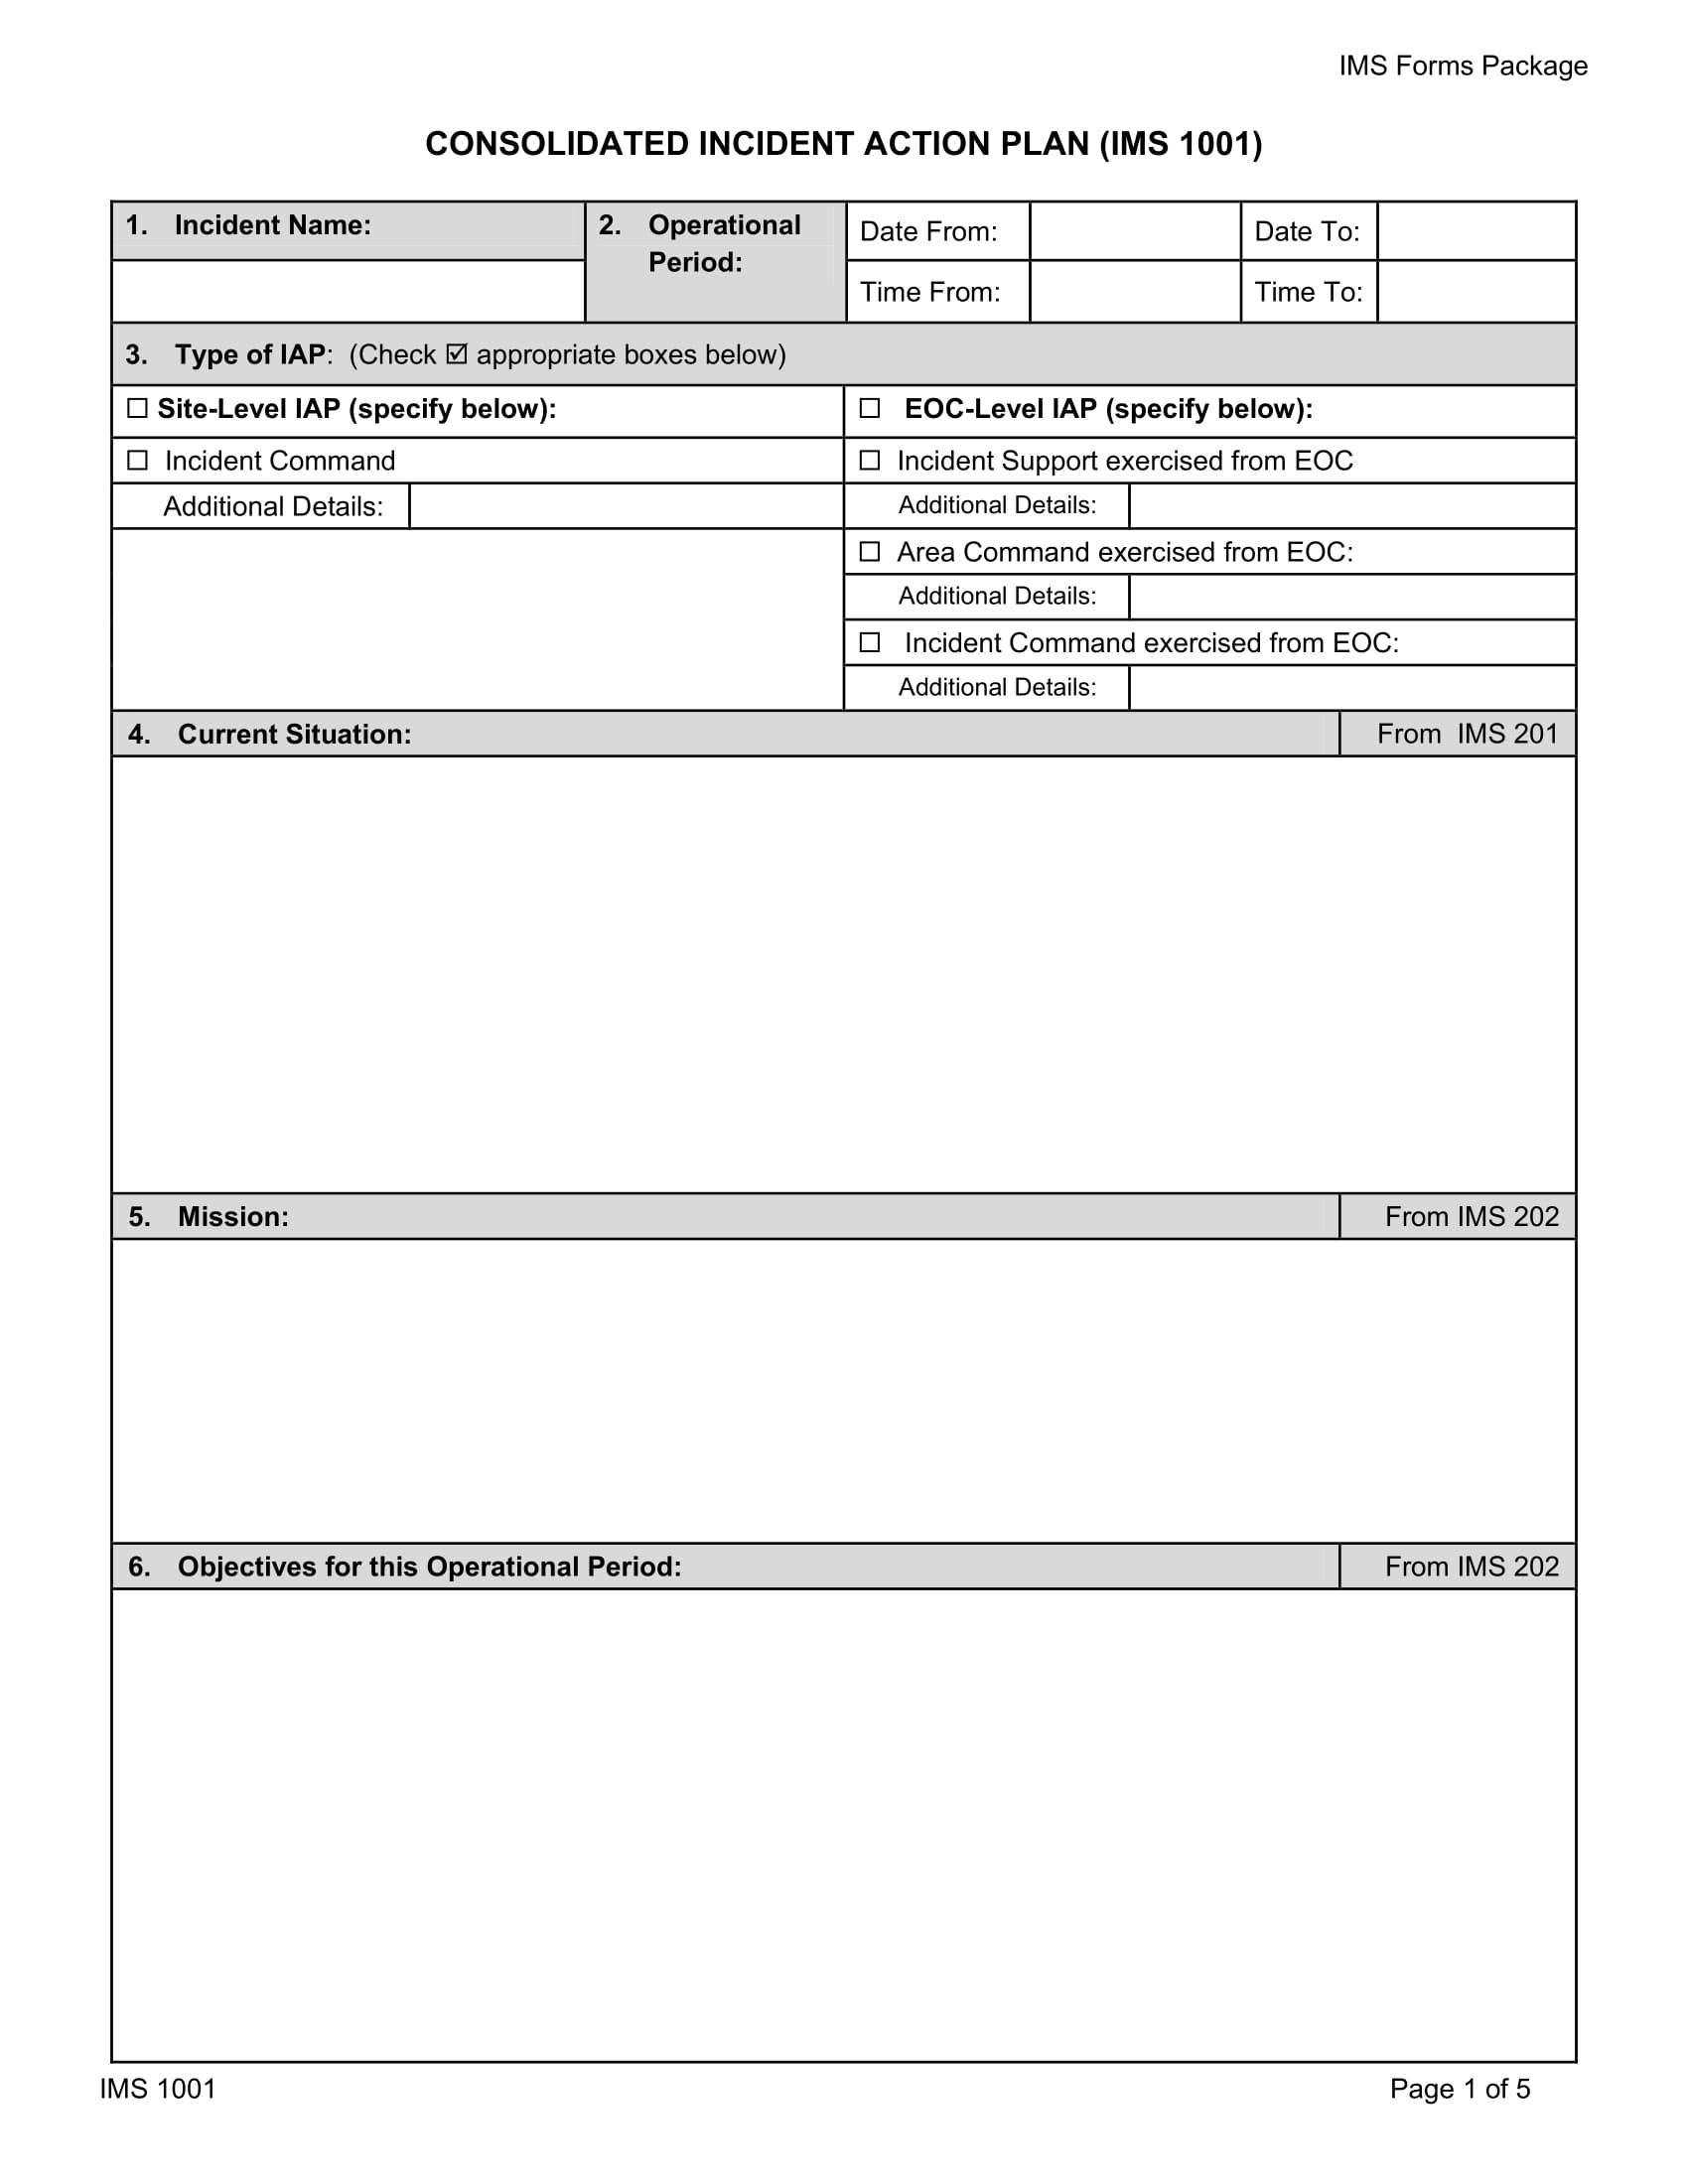 consolidated incident action plan template example